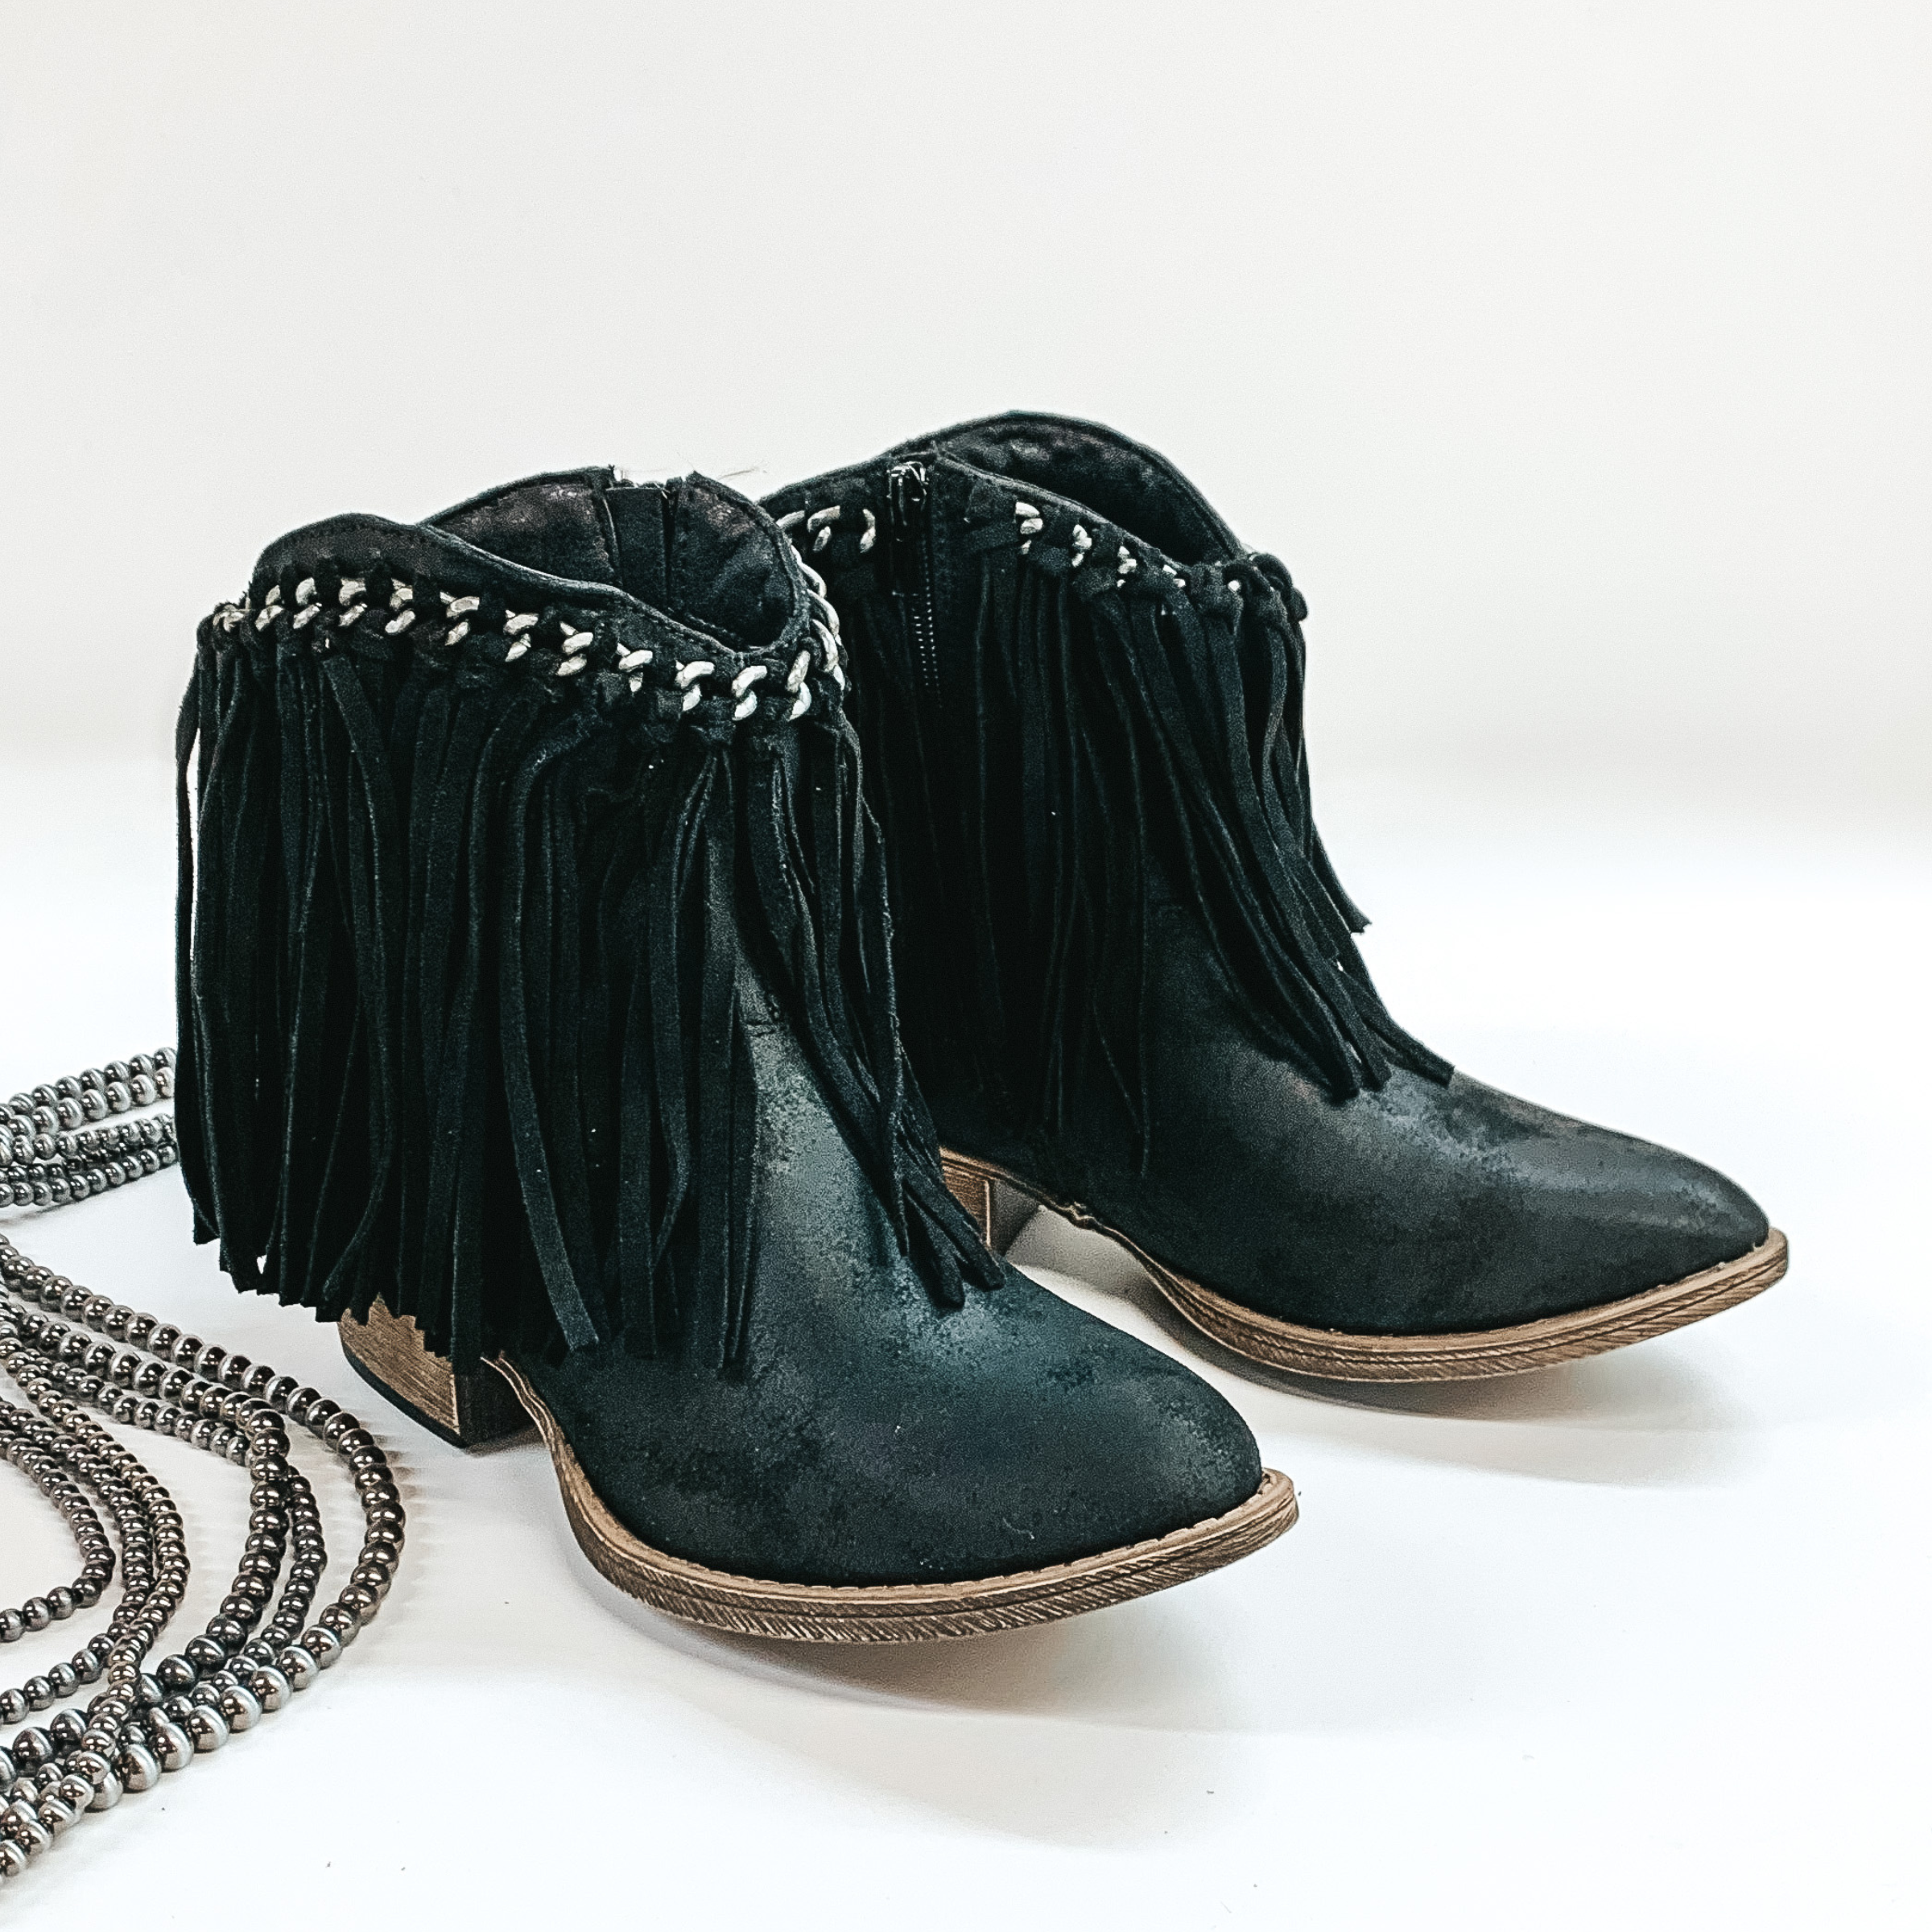 Very G | Rebel Girl Heeled Ankle Booties with Fringe in Black